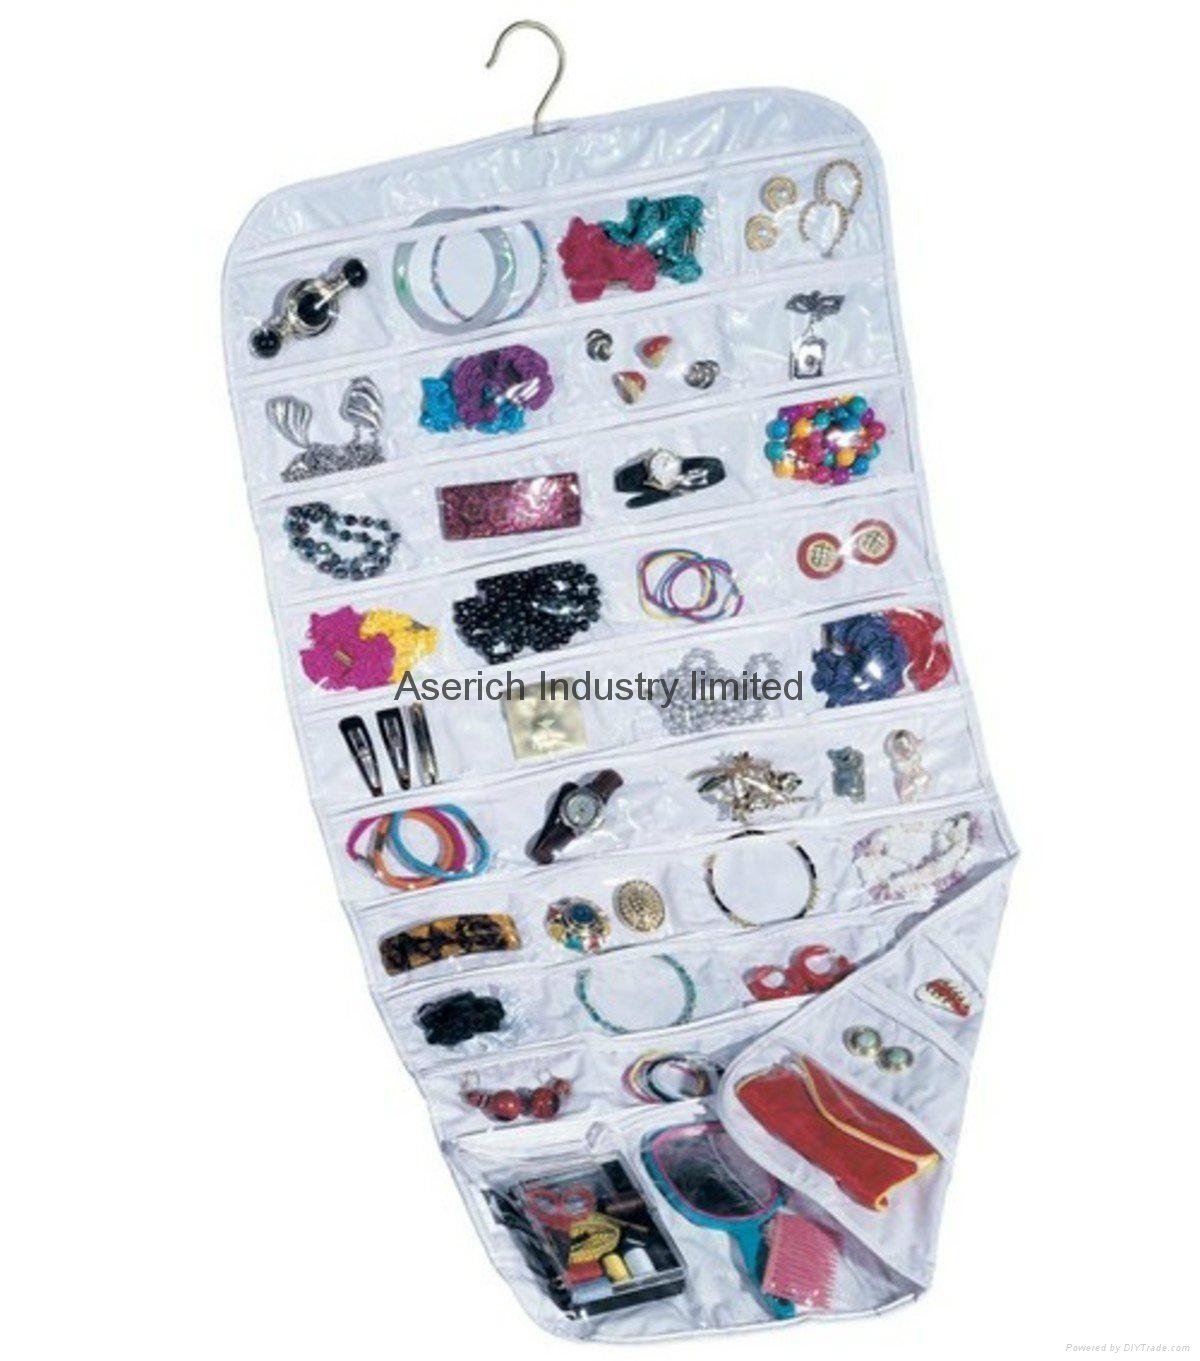 80 Pockets Hanging Jewelry and Accessories Organizer